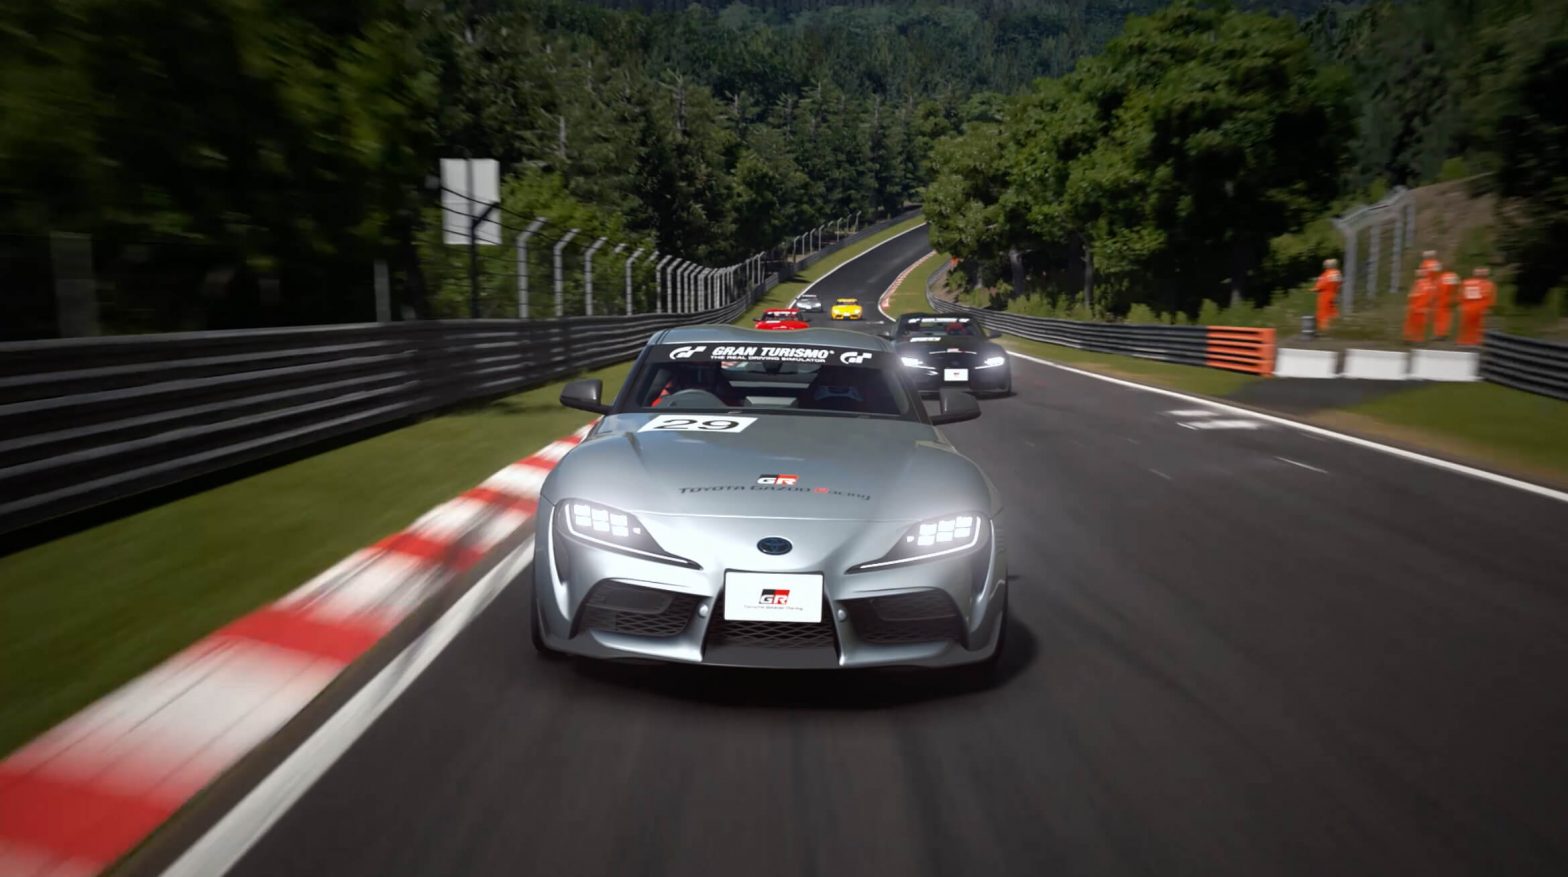 How to join Toyota’s GR Supra GT Cup Asia